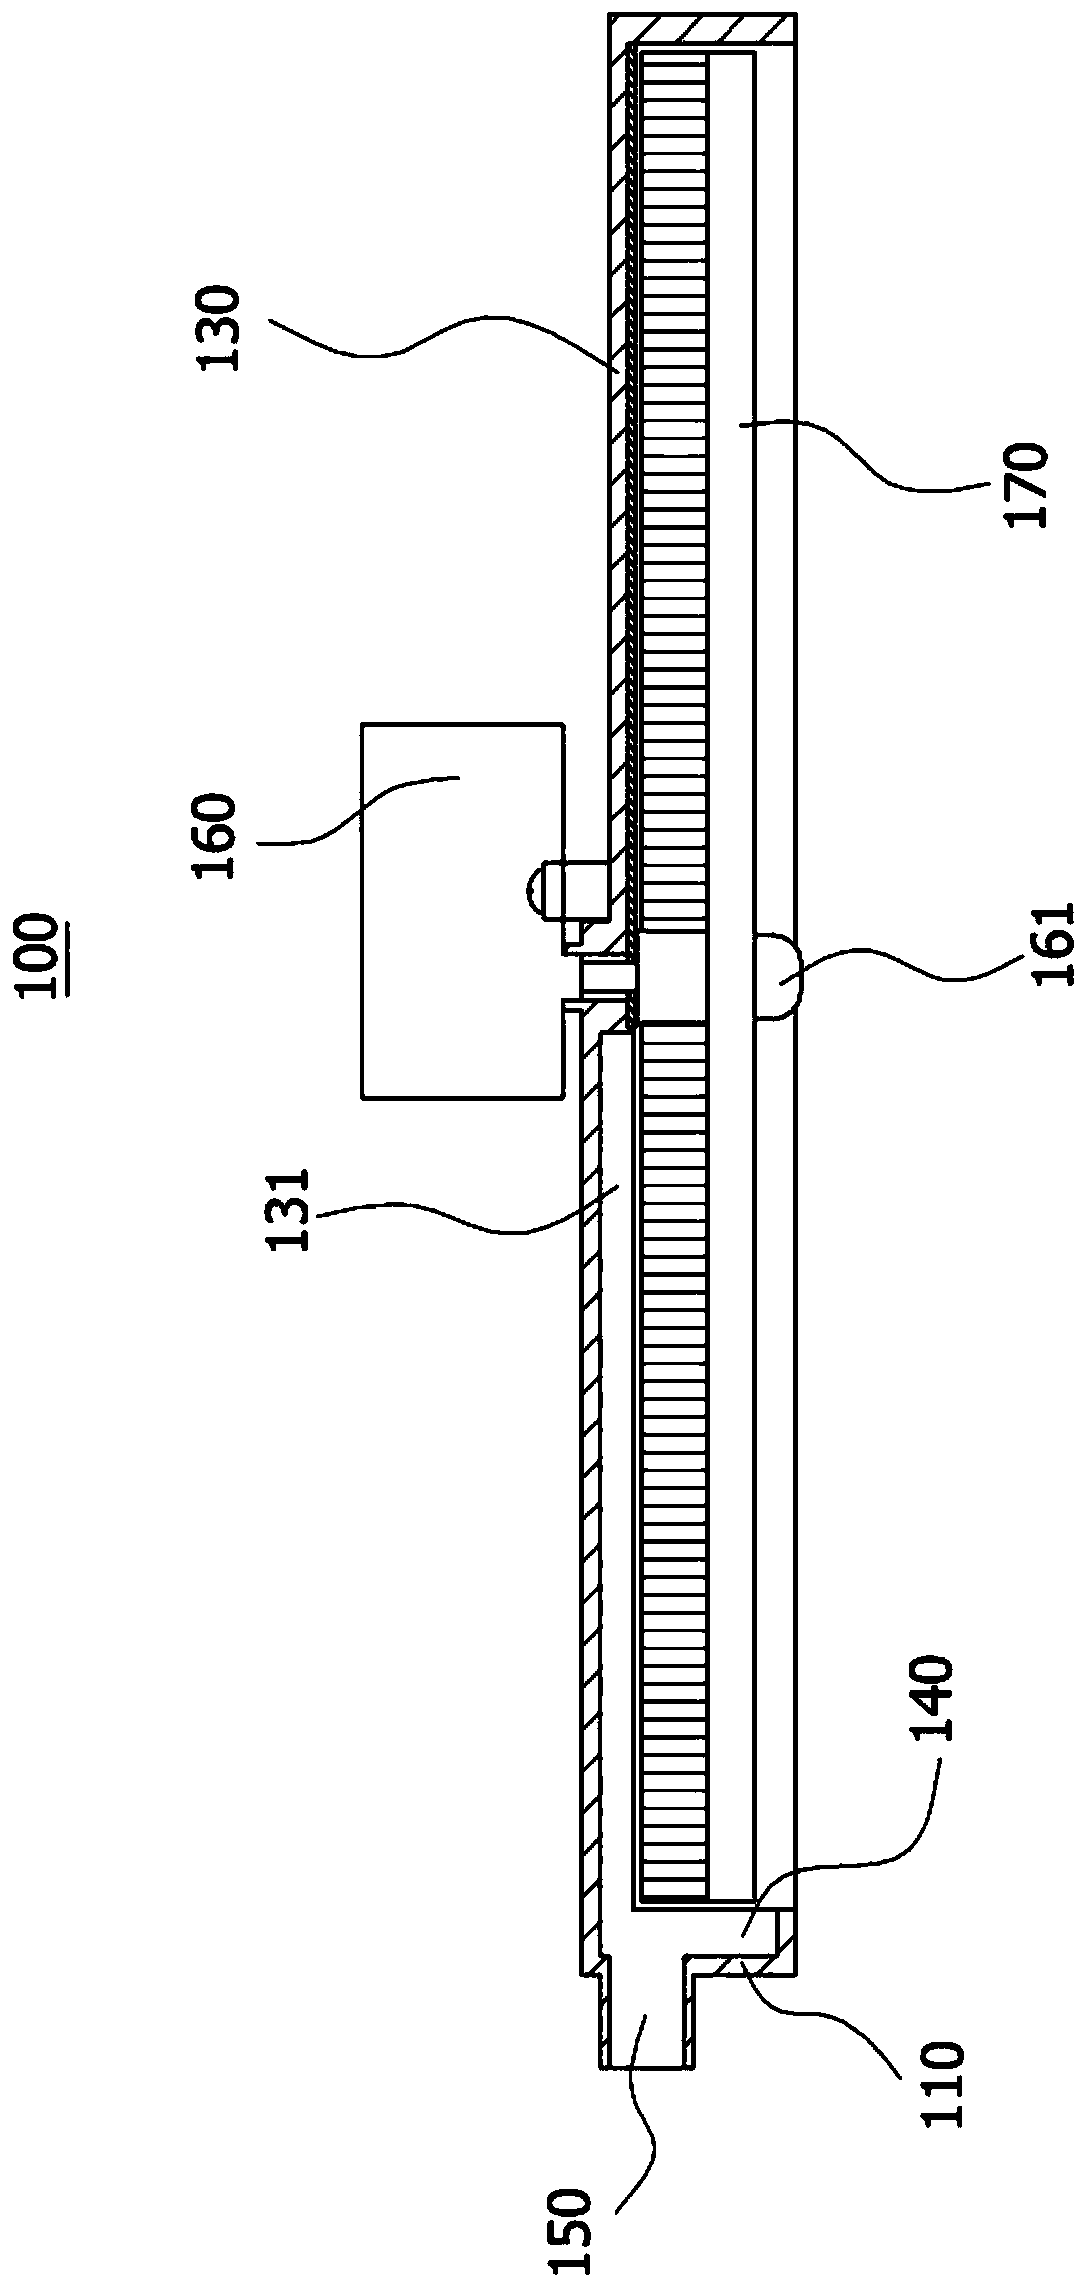 Filter structure capable of removing dust